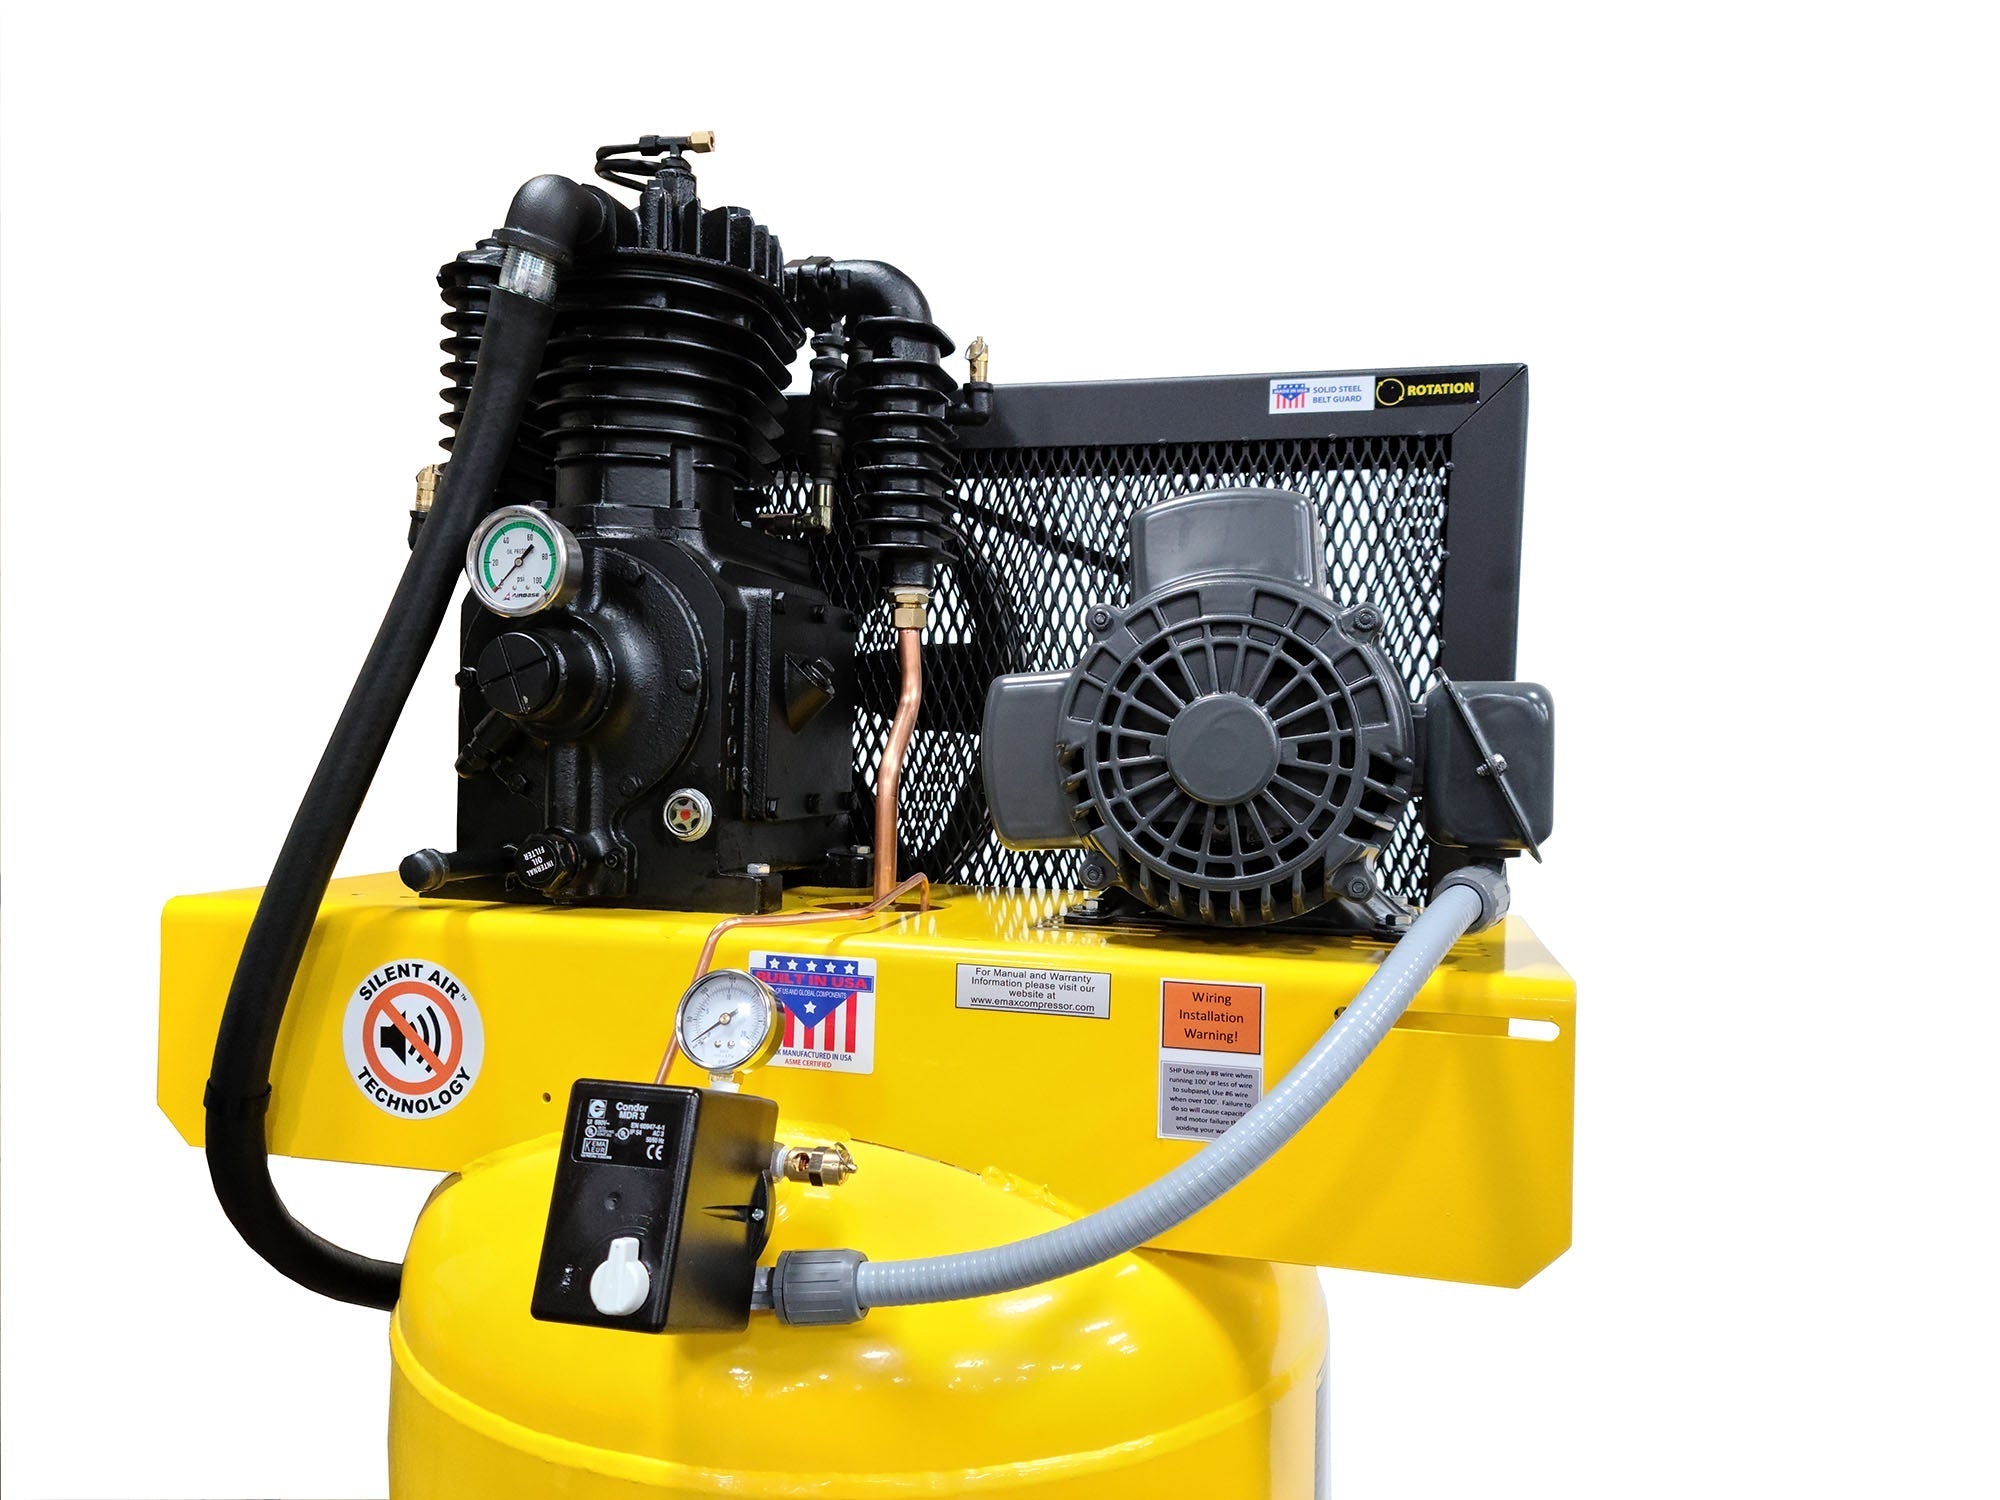 EMAX ES05V080I1 E350 Series – 5 HP Piston Air Compressor, 2 Stage, 1 Phase, 80 Gallon, Vertical, Silent Air System